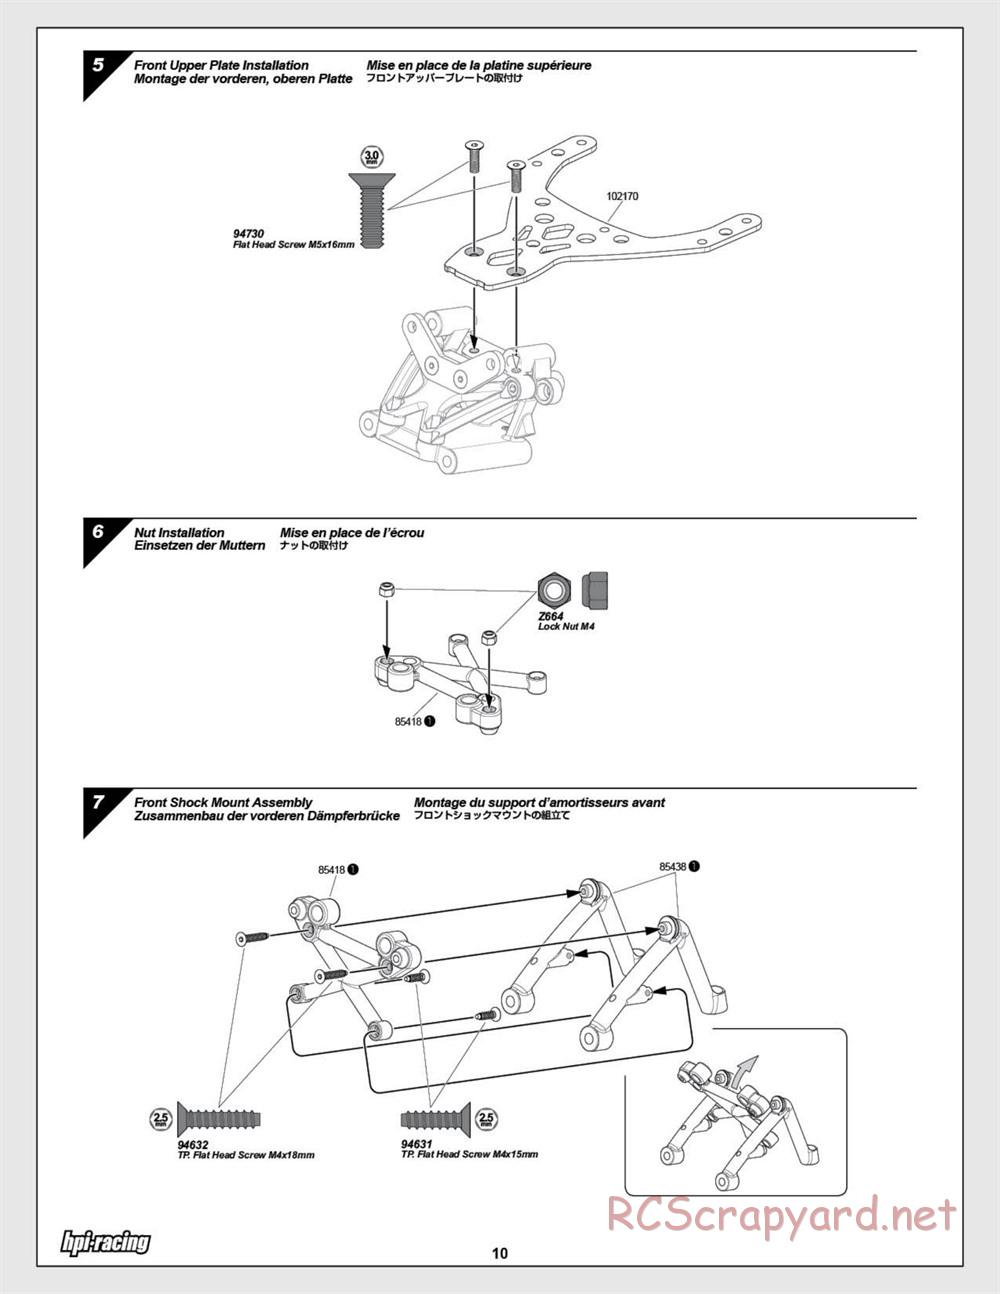 HPI - Baja 5SC SS - Exploded View - Page 10